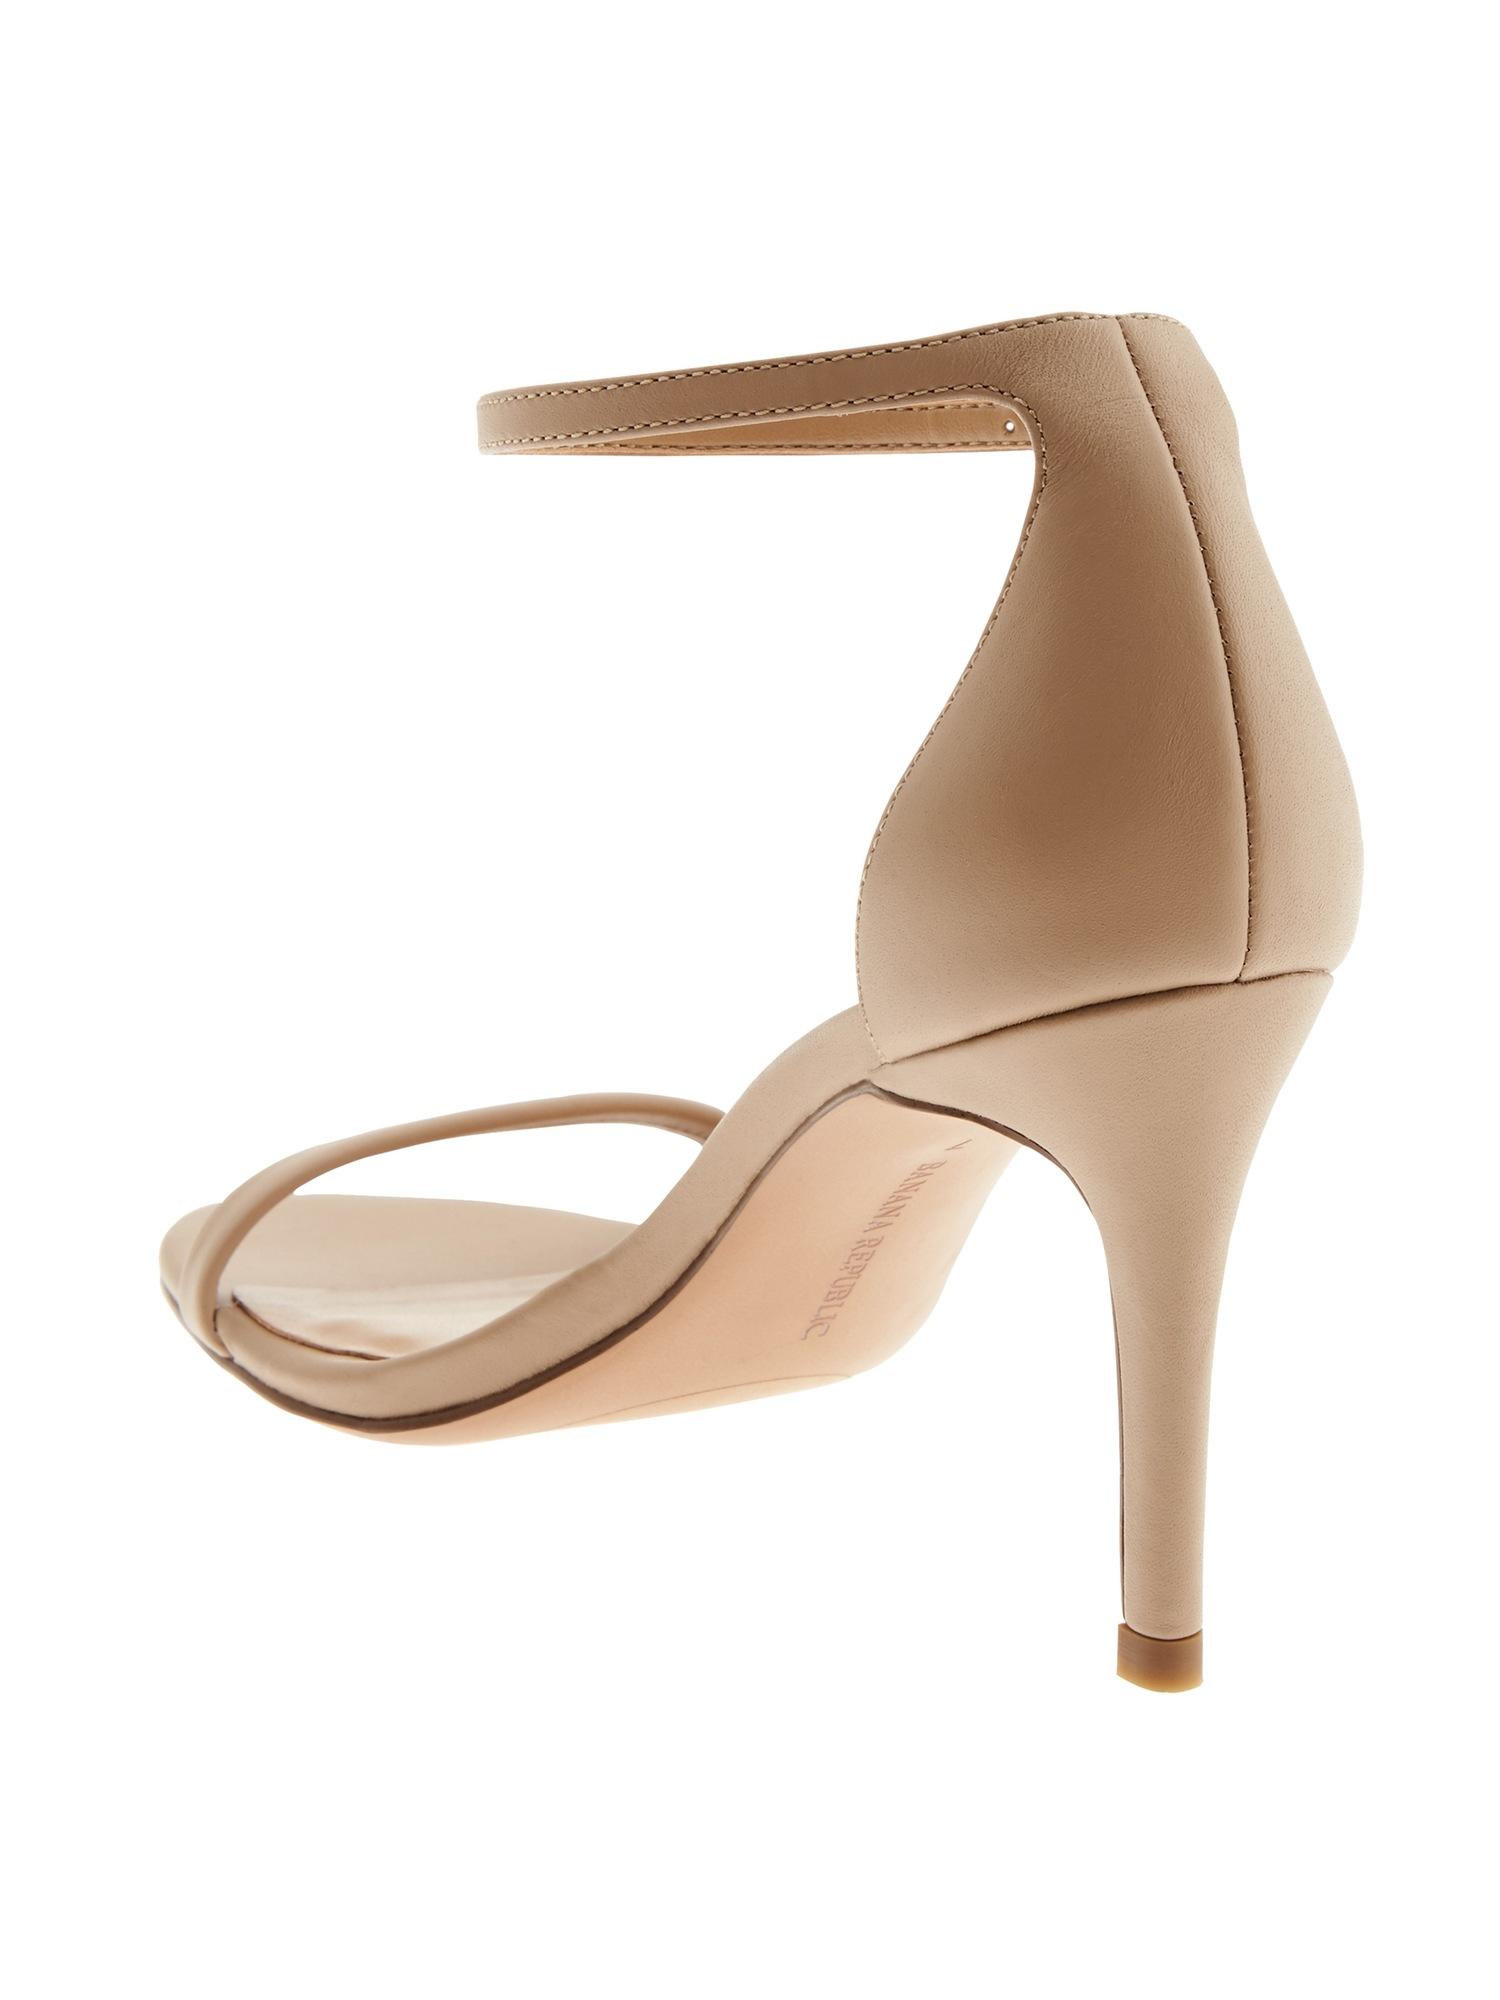 Banana Republic Leather Bare High Heel Sandal in Beige Leather (Natural) -  Lyst